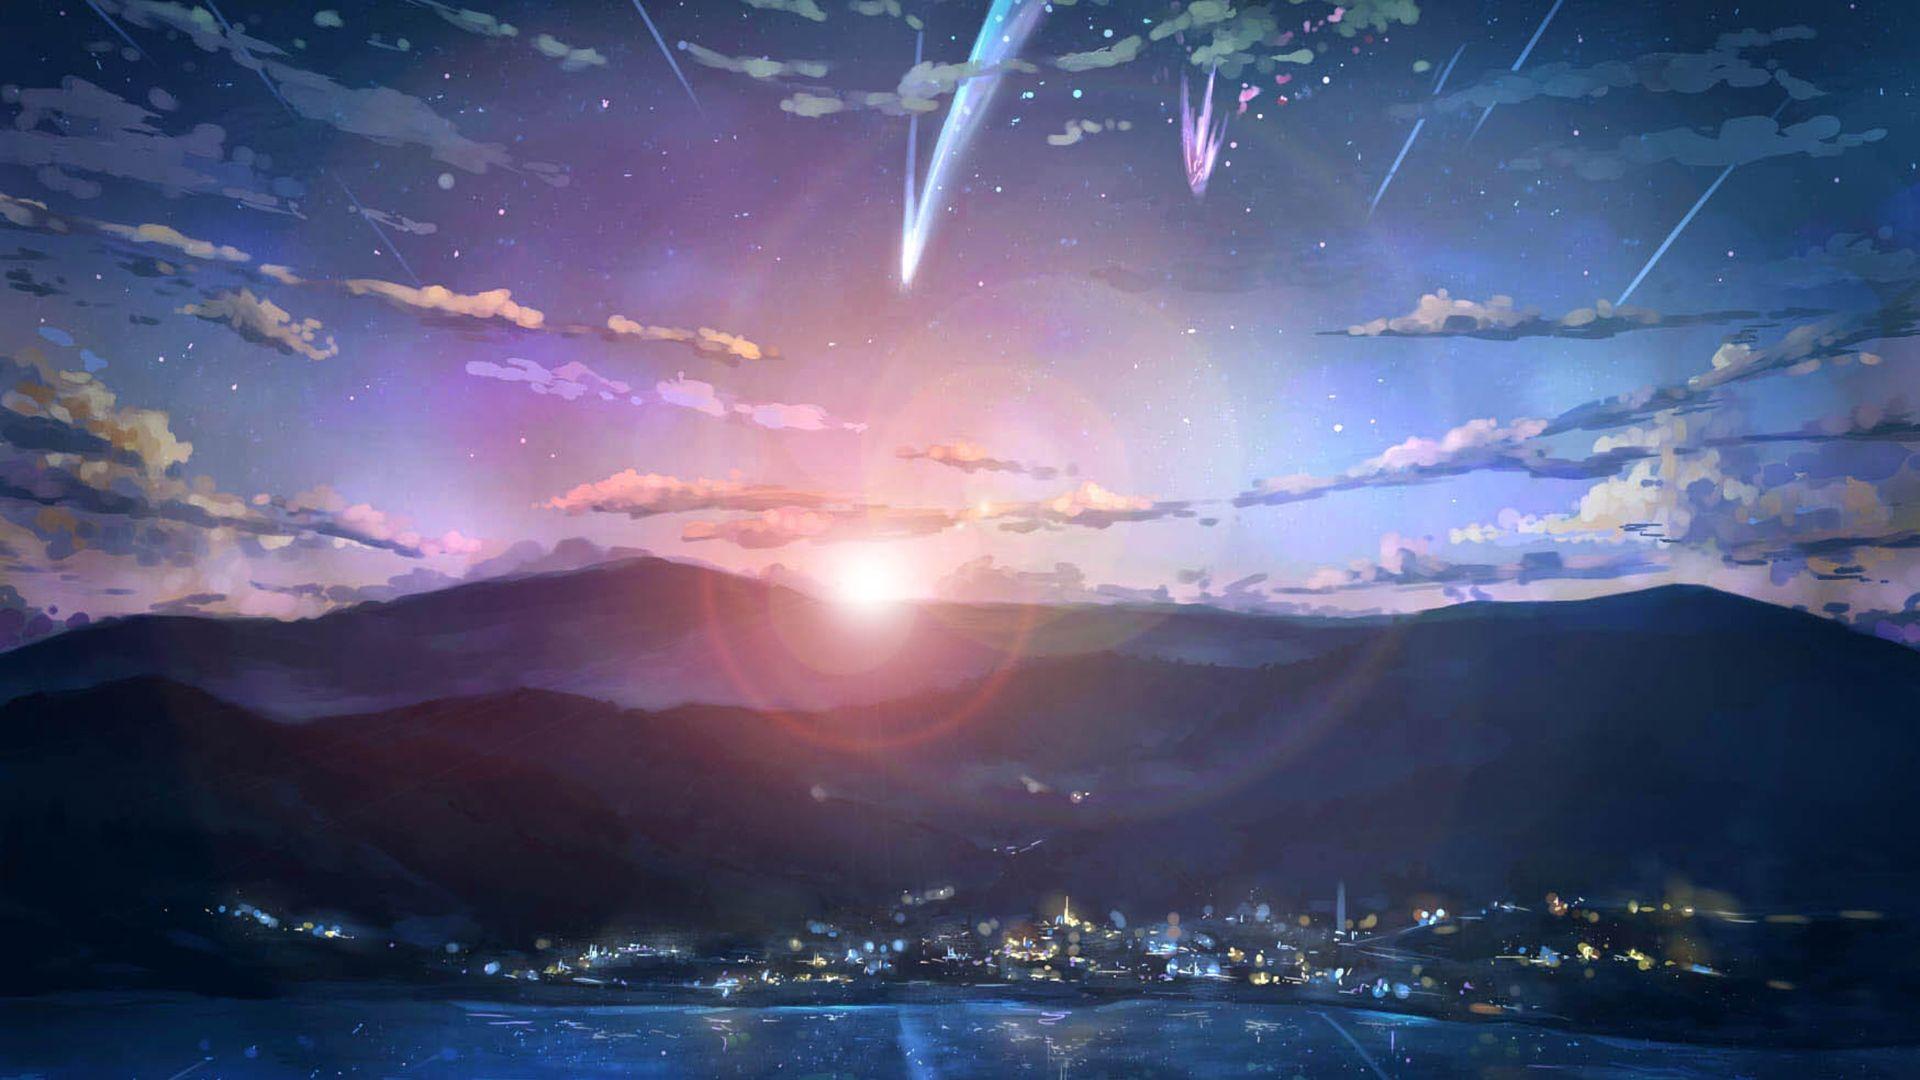 Your Name Scenery Wallpapers - Top Free Your Name Scenery Backgrounds ...